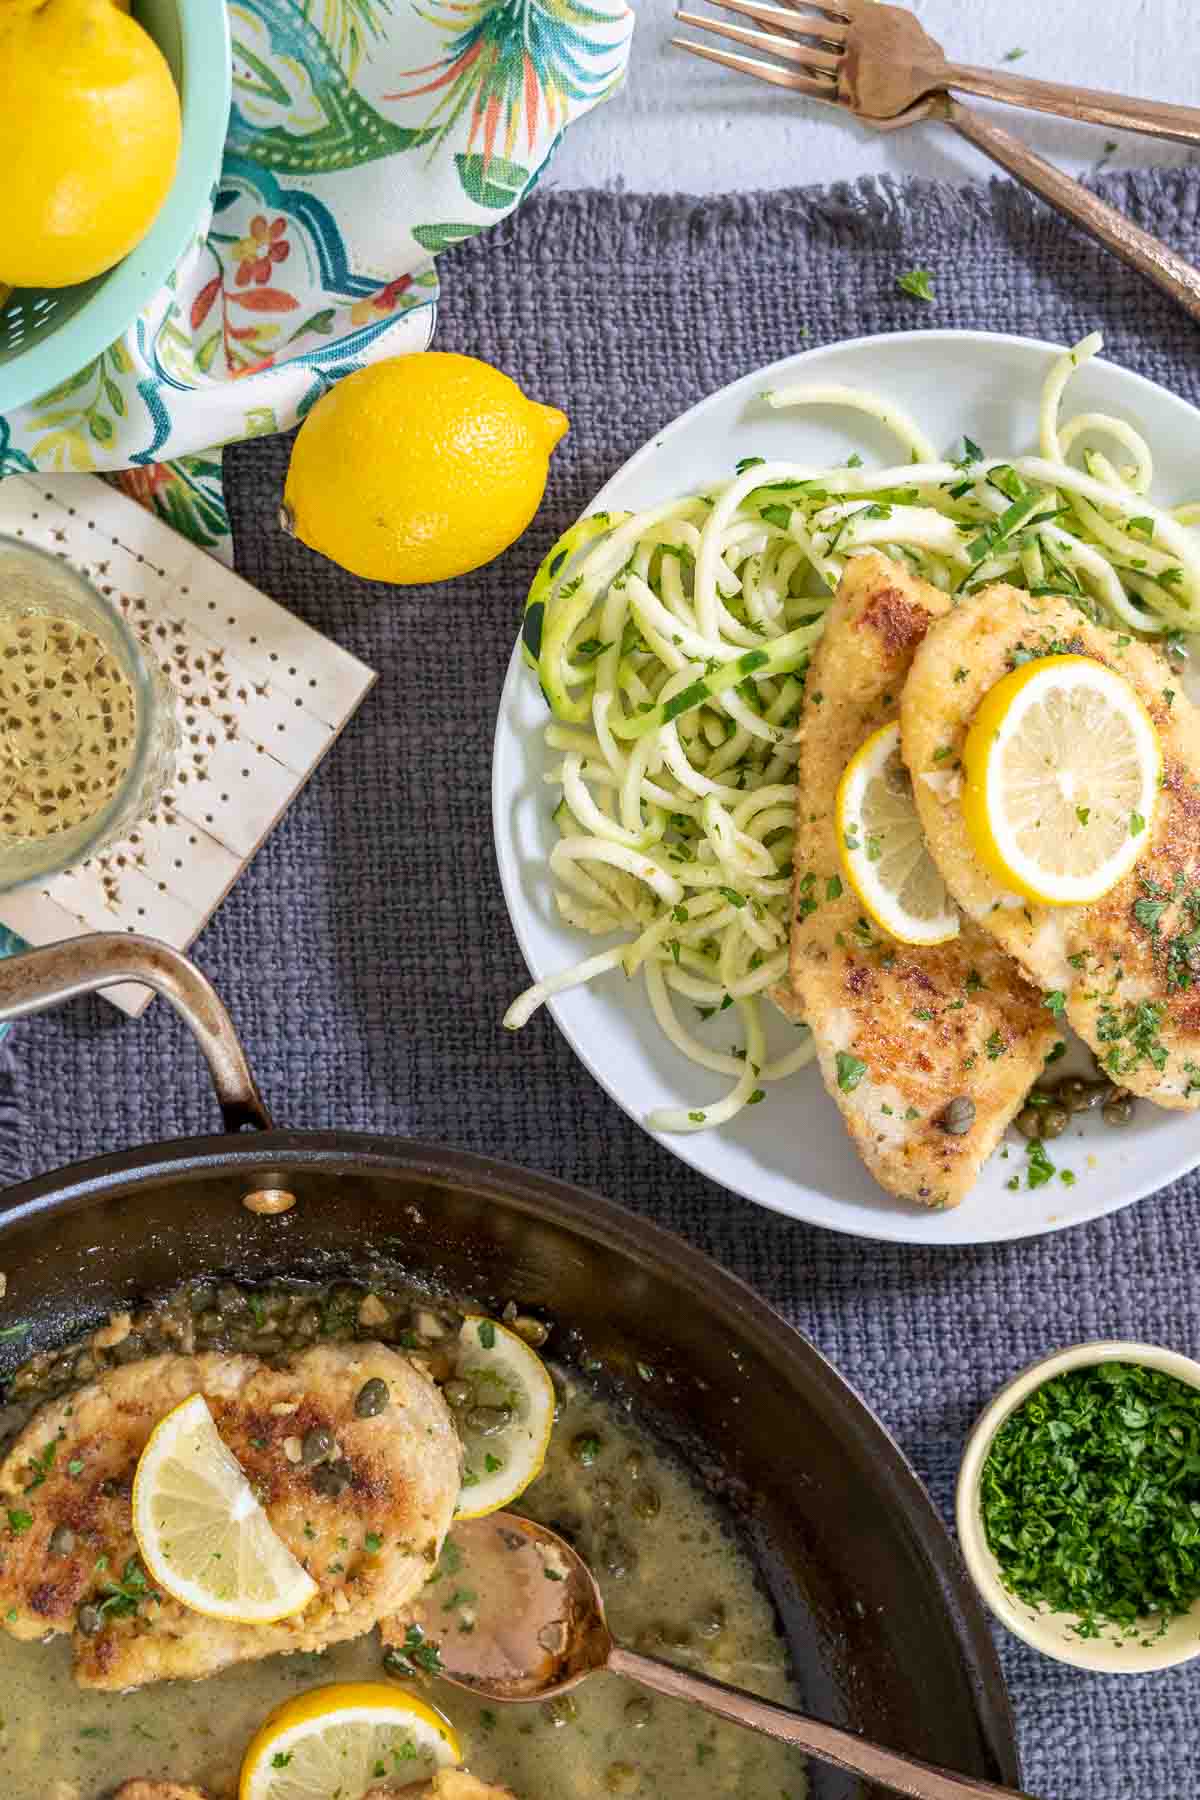 Chicken piccata being served from the saute pan.